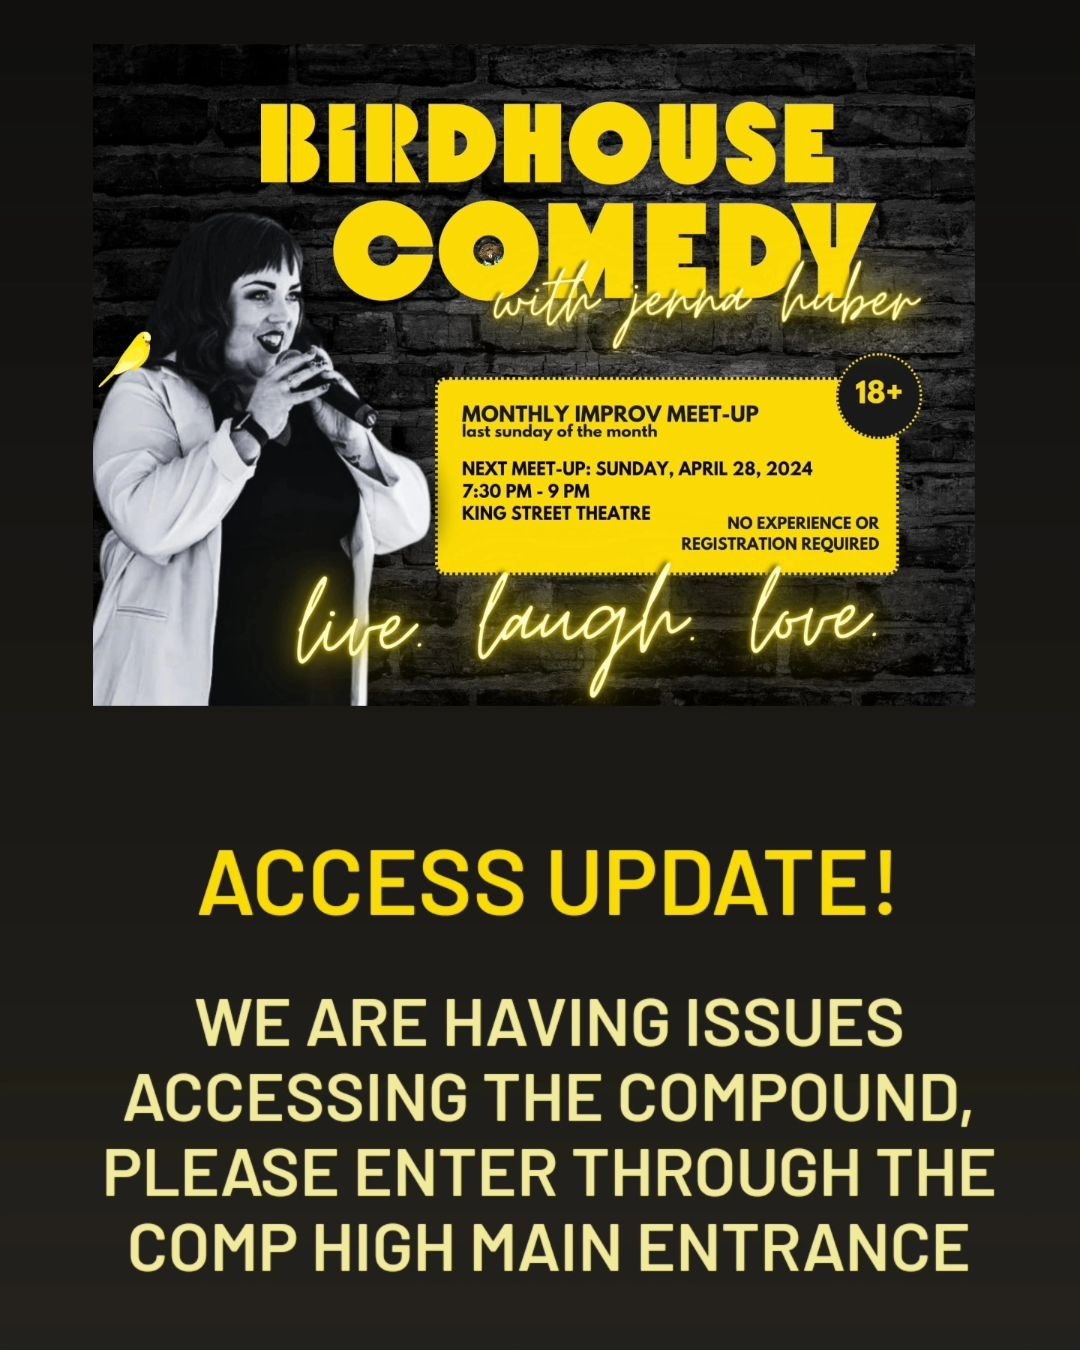 Access update! We are having issues accessing the compound, please use the Comp High School main entrance for access to the Birdhouse Comedy meet-up tonight. We apologize for the inconvenience. #YMMTheatre